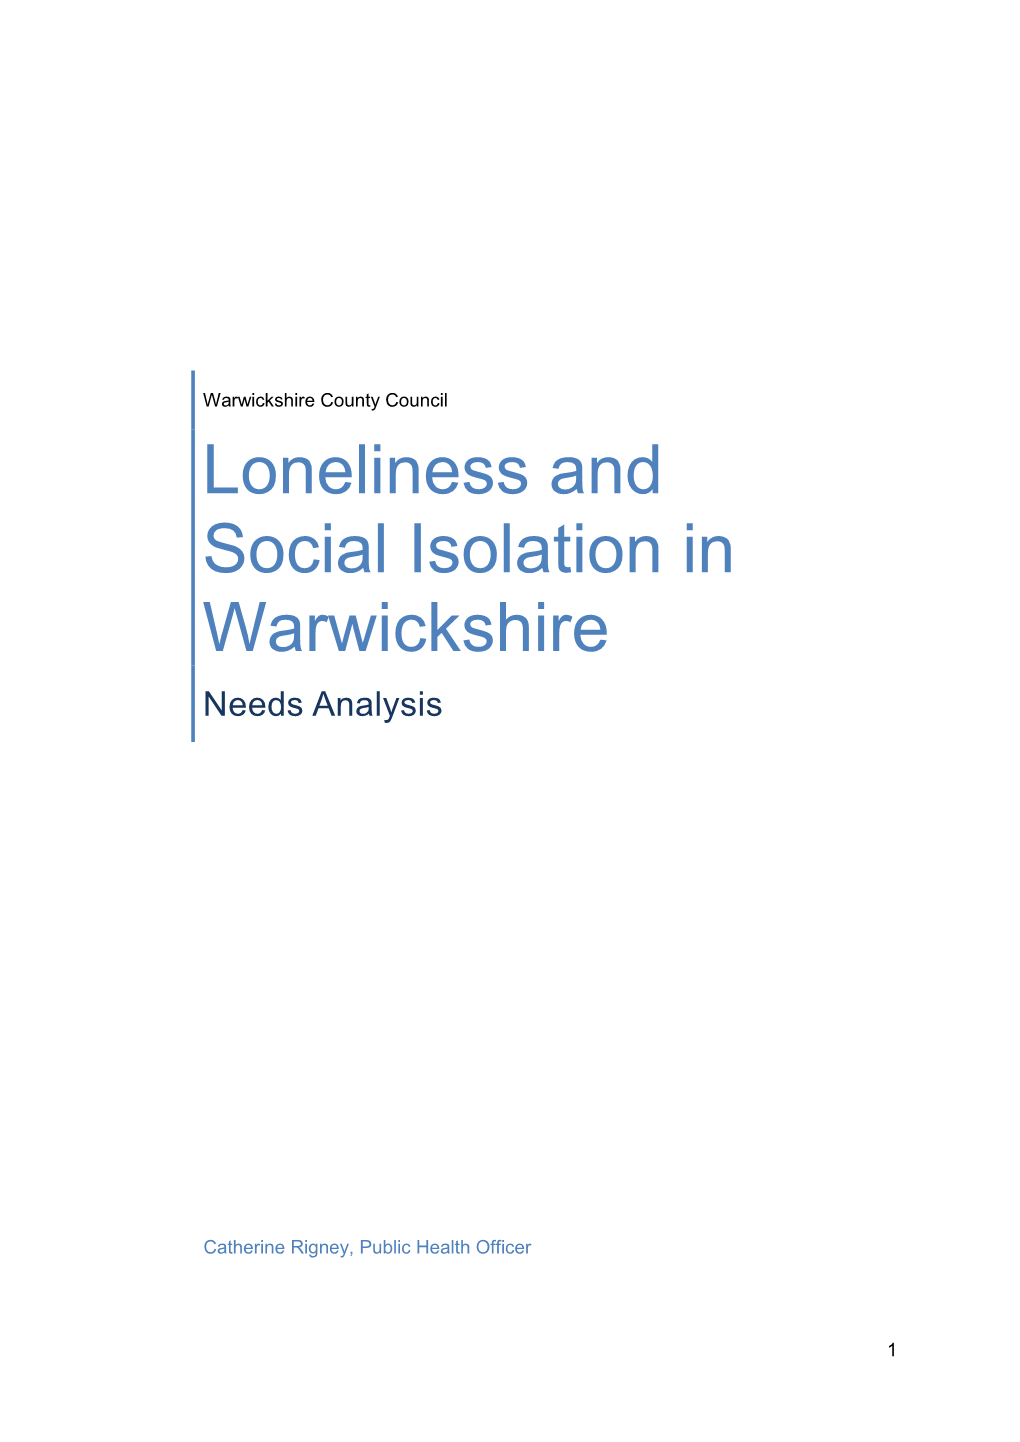 Loneliness and Social Isolation in Warwickshire